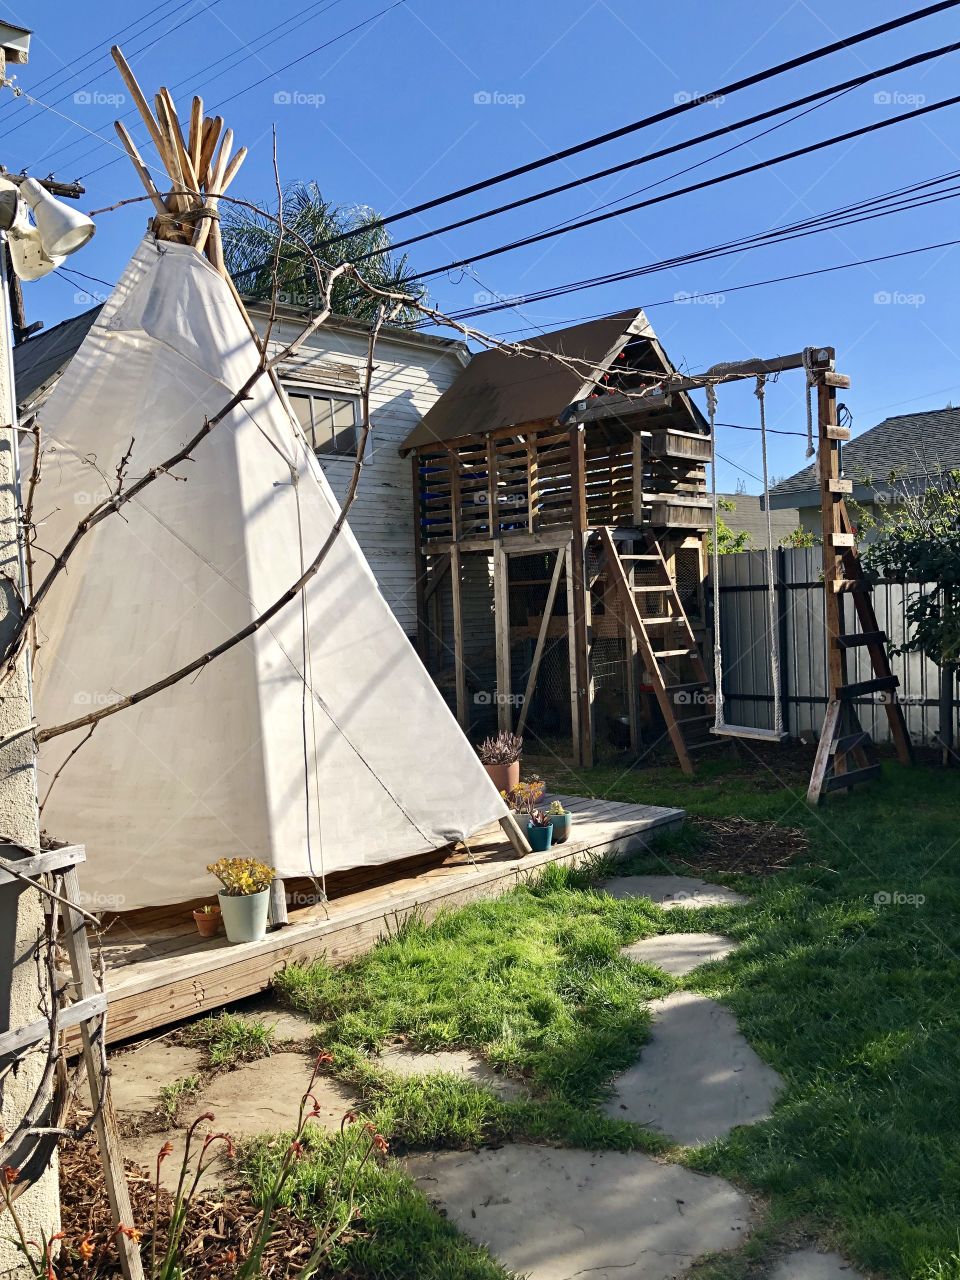 A dreamers backyard with a tee pee and swing set